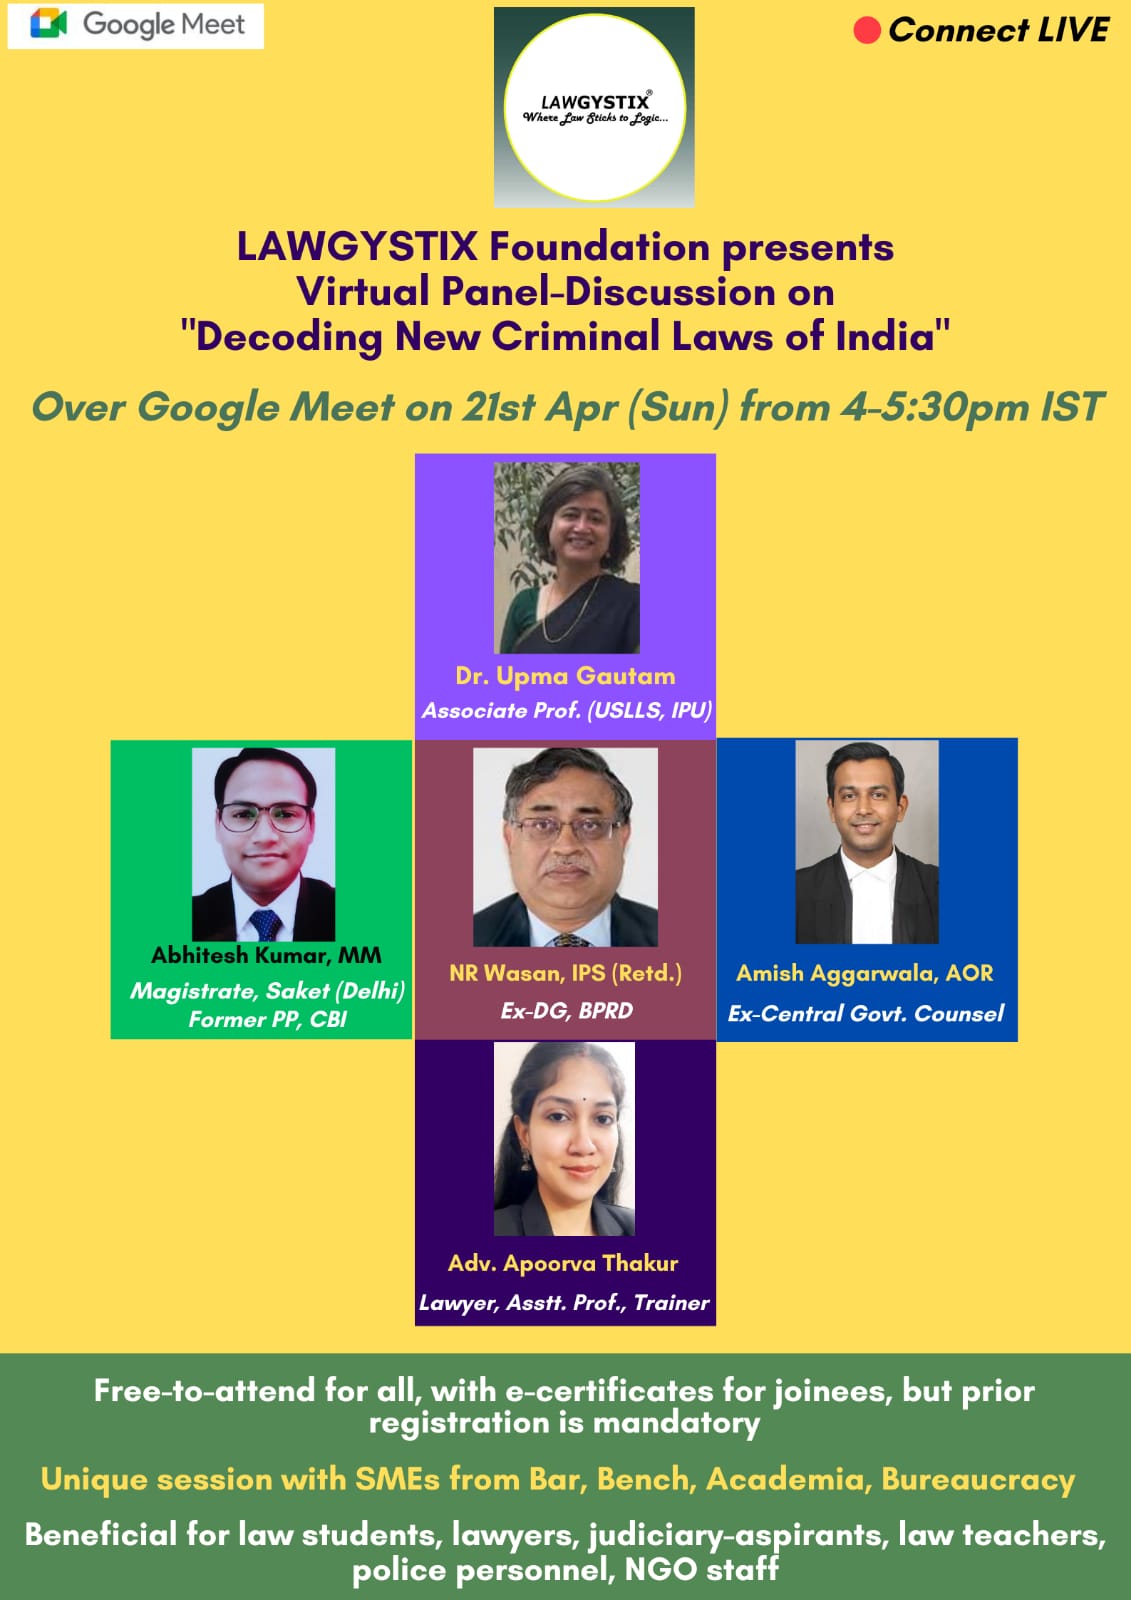 Virtual Panel Discussion with SMEs on Decoding New Criminal Laws of India